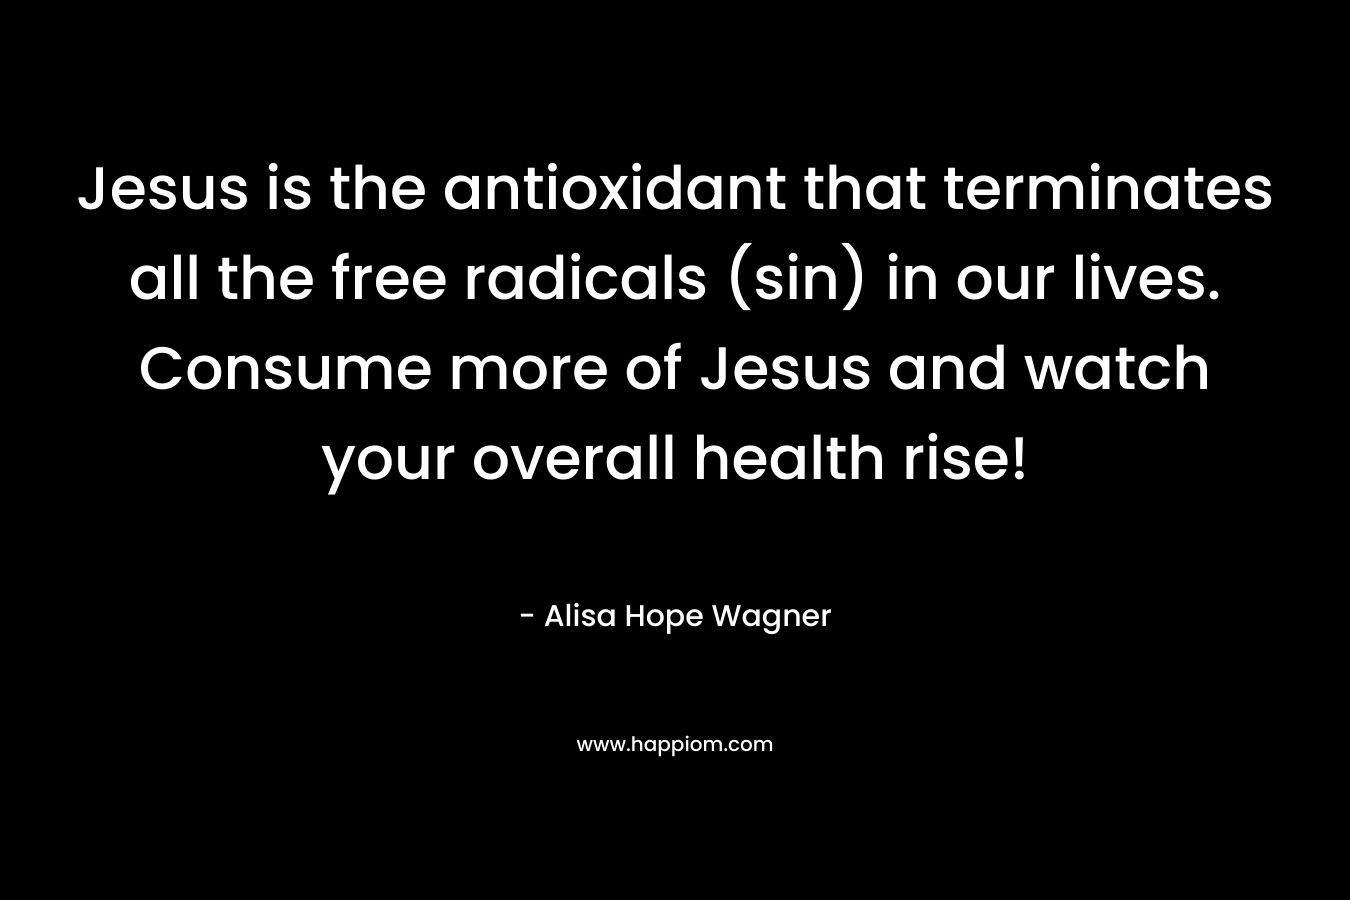 Jesus is the antioxidant that terminates all the free radicals (sin) in our lives. Consume more of Jesus and watch your overall health rise!